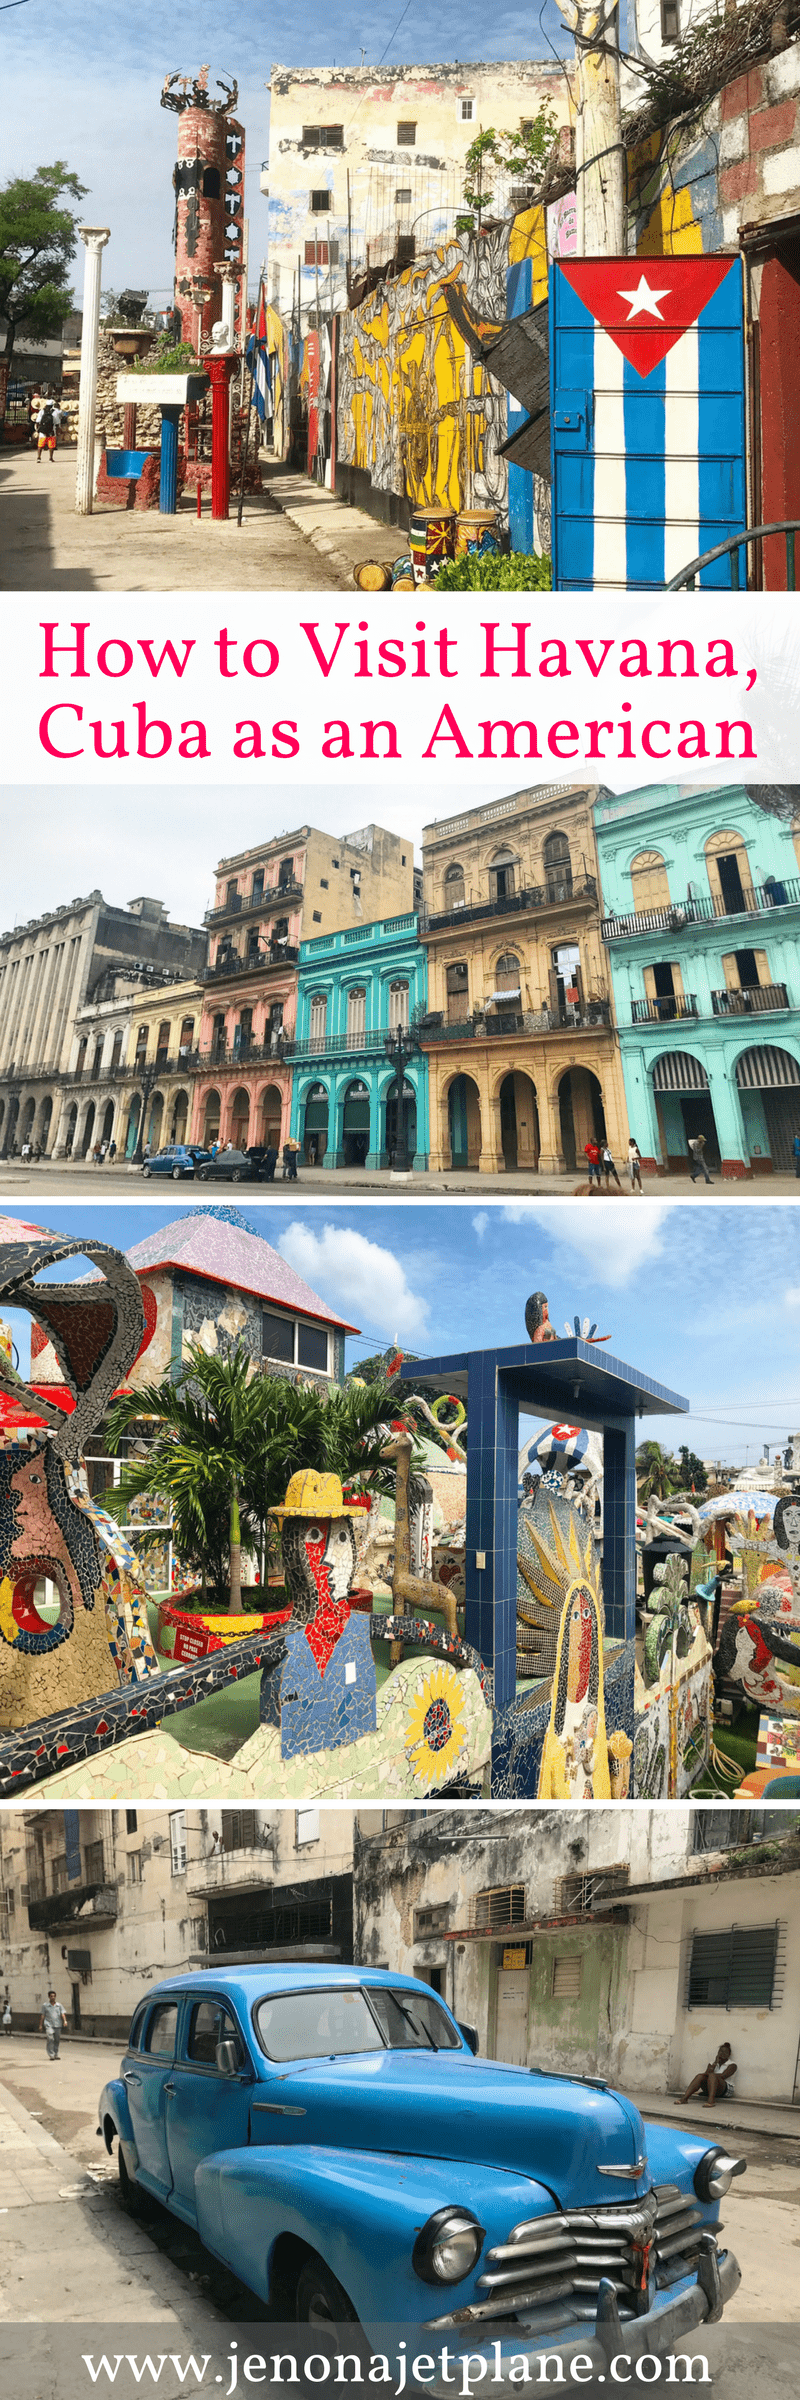 Havana, Cuba is a beautiful city that is still accessible to US citizens despite the embargo or recent policy changes. Find out how you can get to Cuba as an American, and what you absolutely must do once you get there! Save to your travel board for future reference.